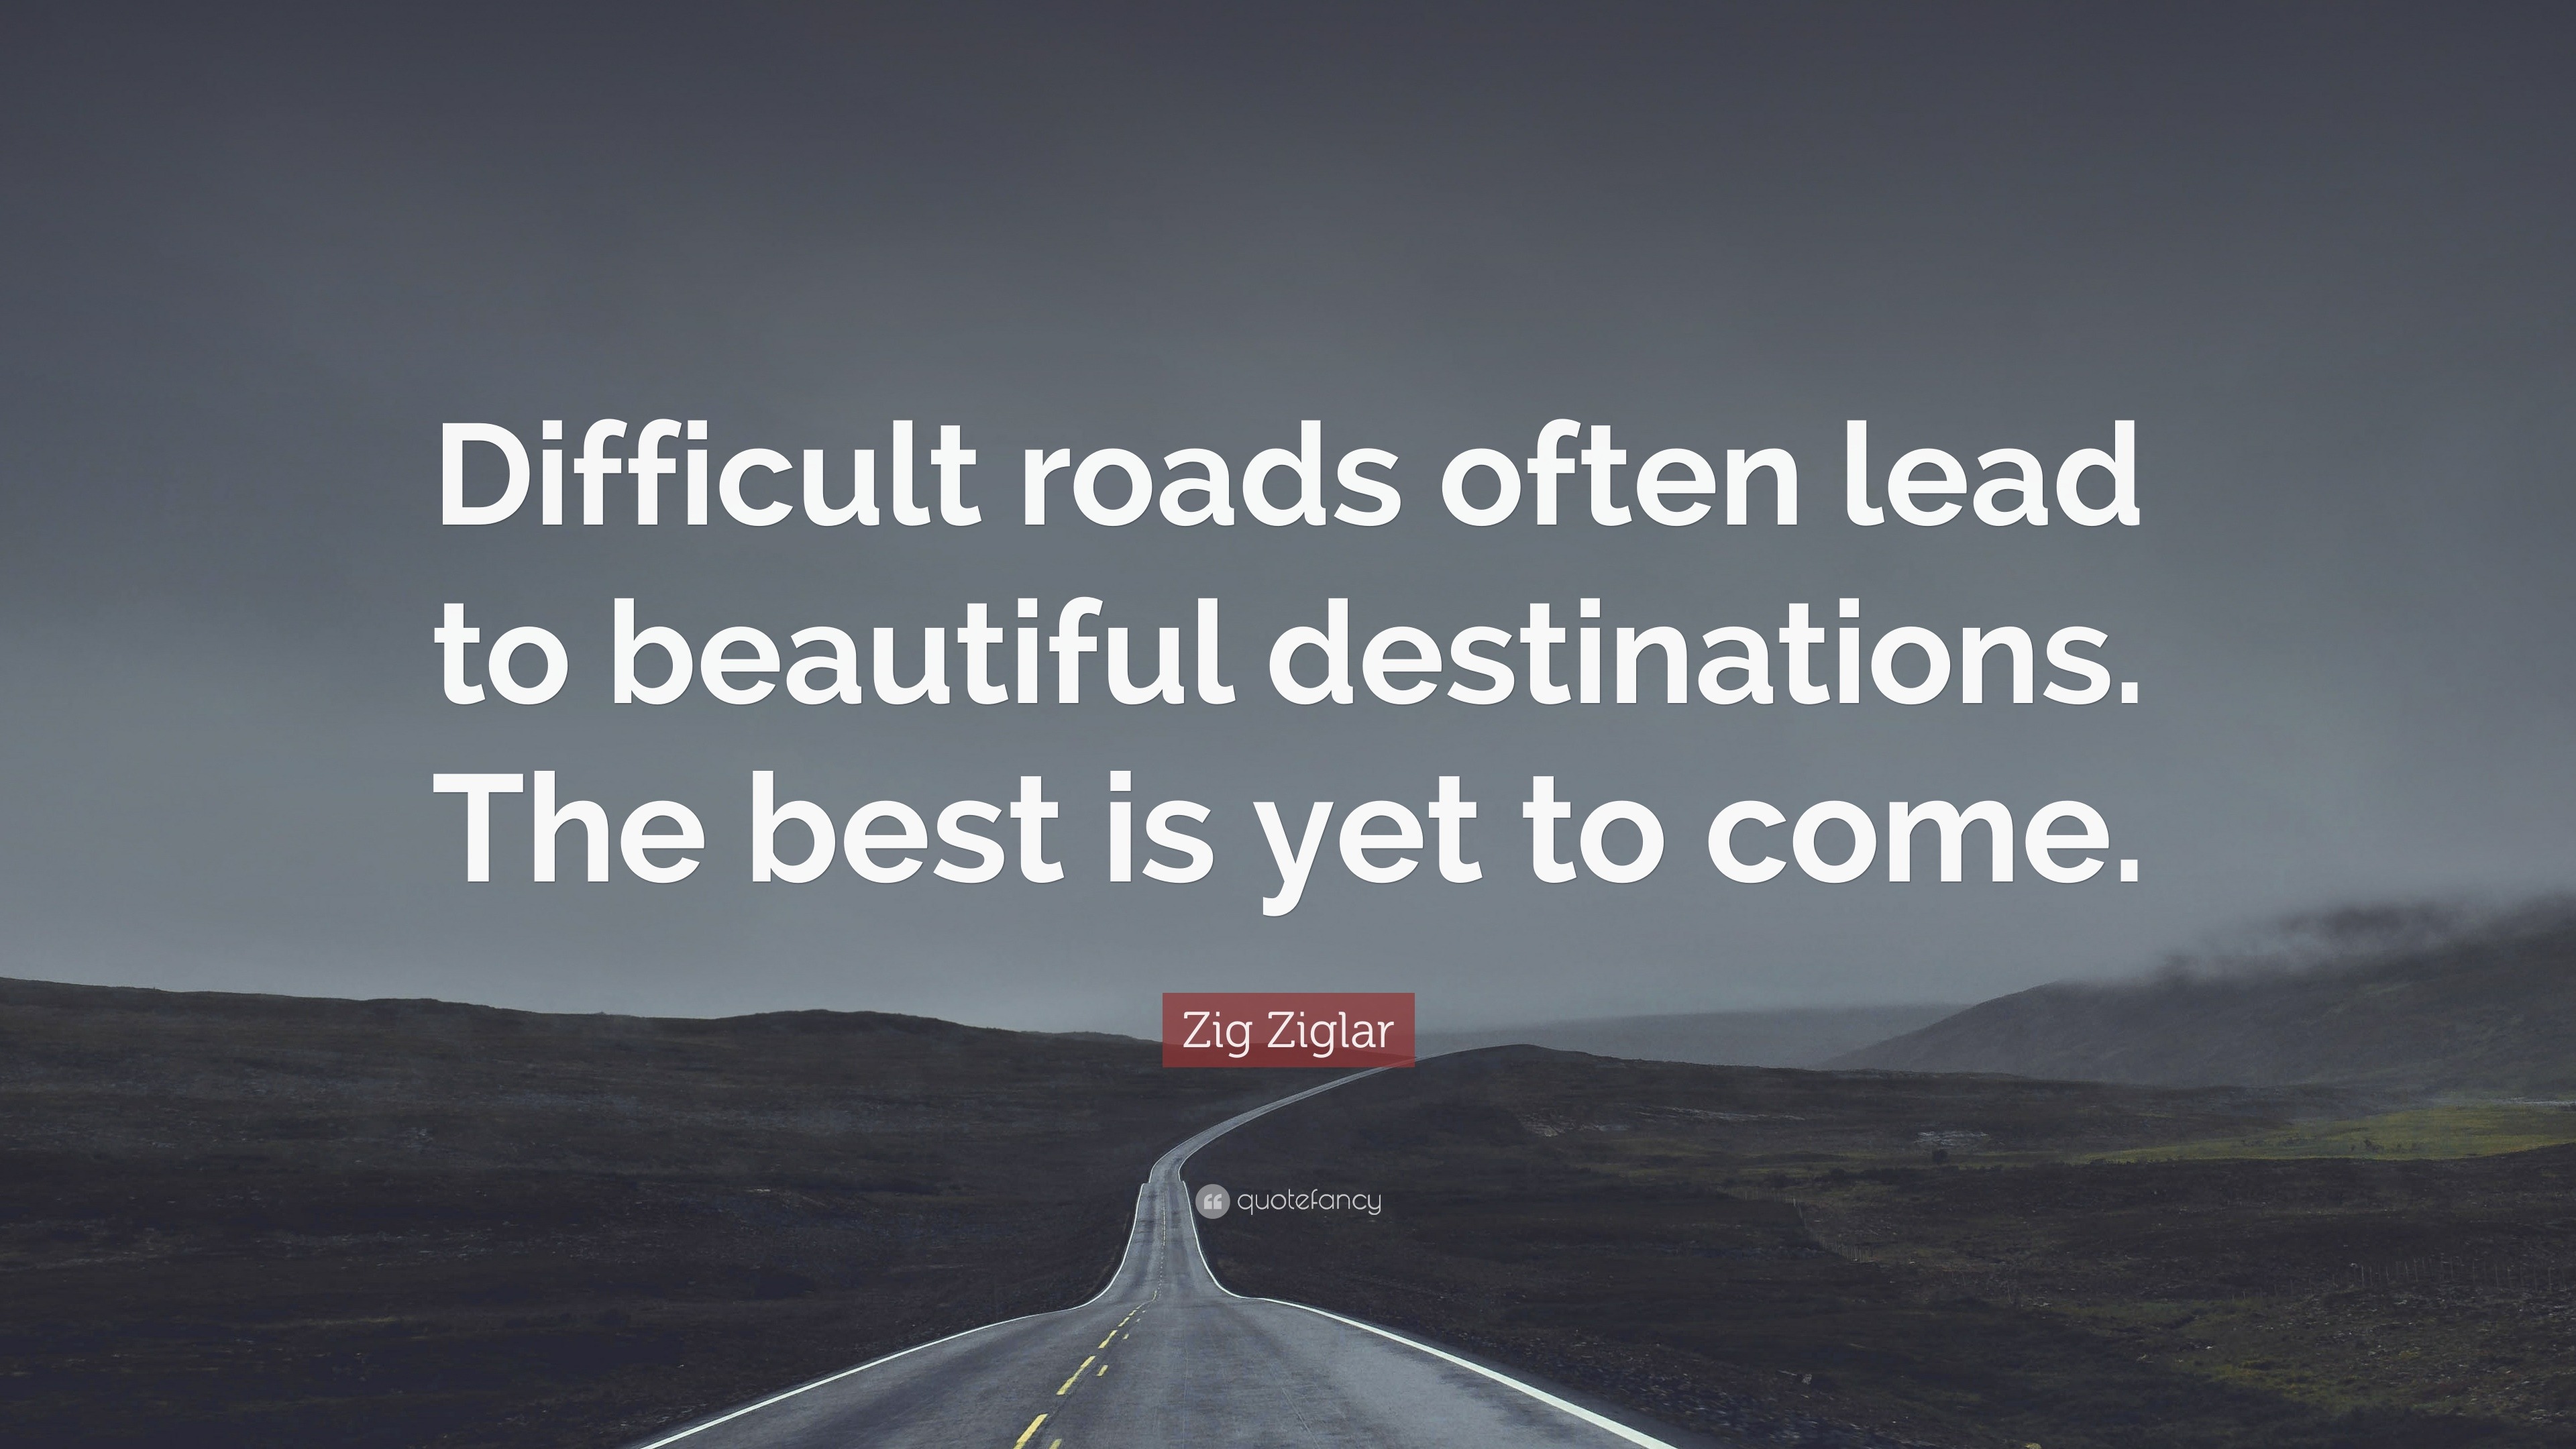 difficult journeys lead to beautiful destinations